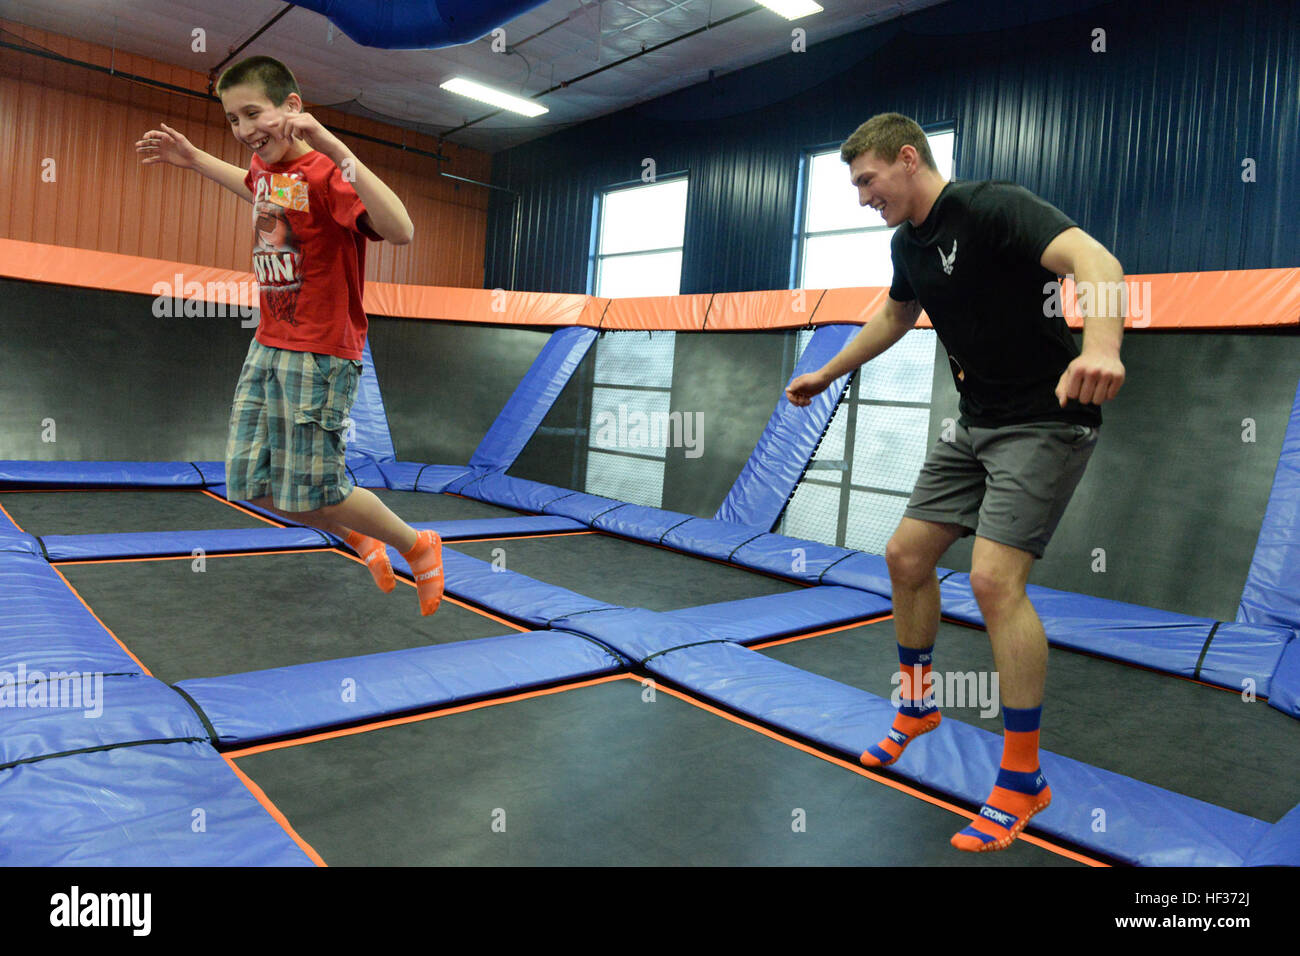 Sky Zone Indoor Trampoline Park High Resolution Stock Photography and  Images - Alamy